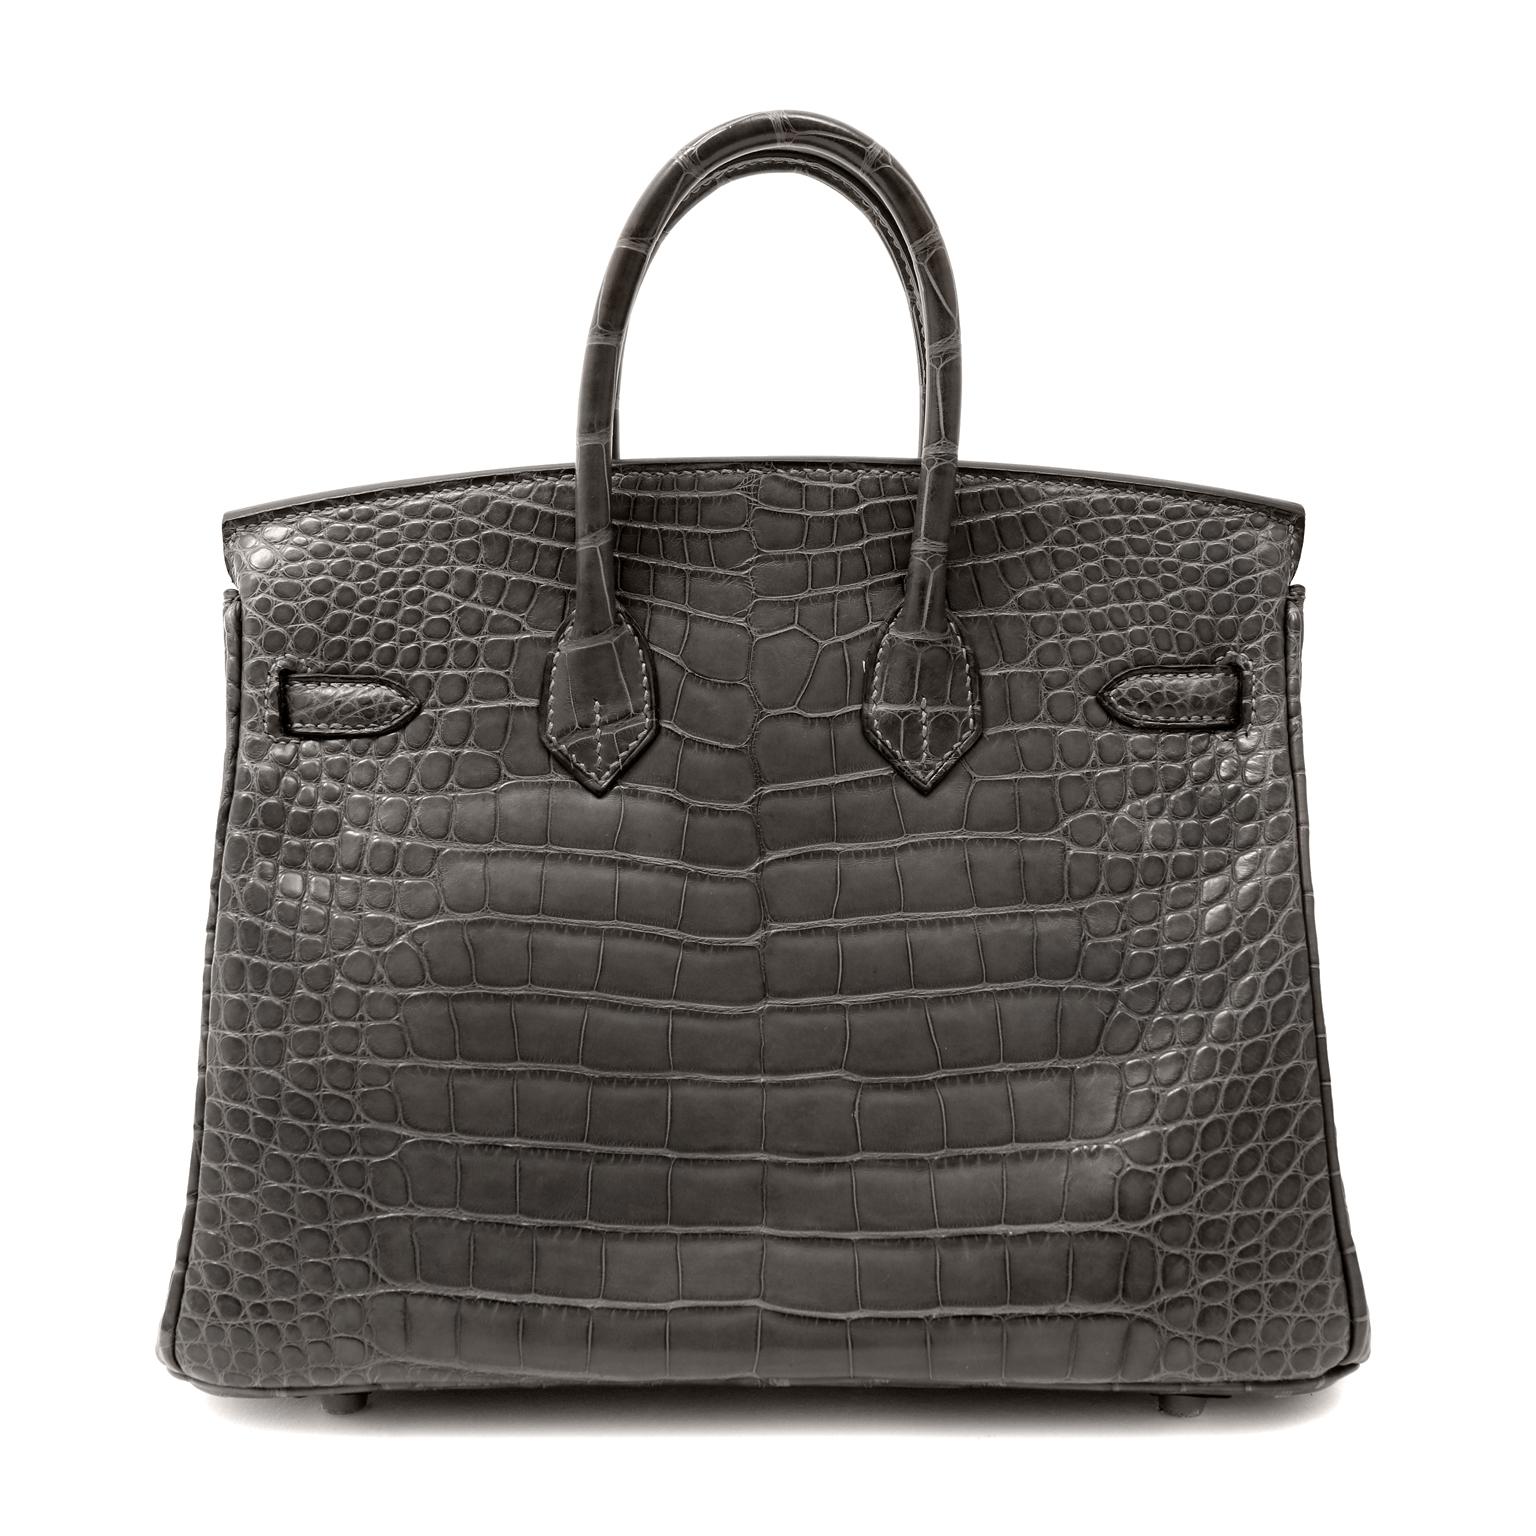 This authentic Hermès 25 cm Graphite Matte Crocodile Birkin is in pristine   unworn condition with the protective plastic intact on the hardware.   Hermès bags are considered the ultimate luxury item the world over.  Hand stitched by skilled